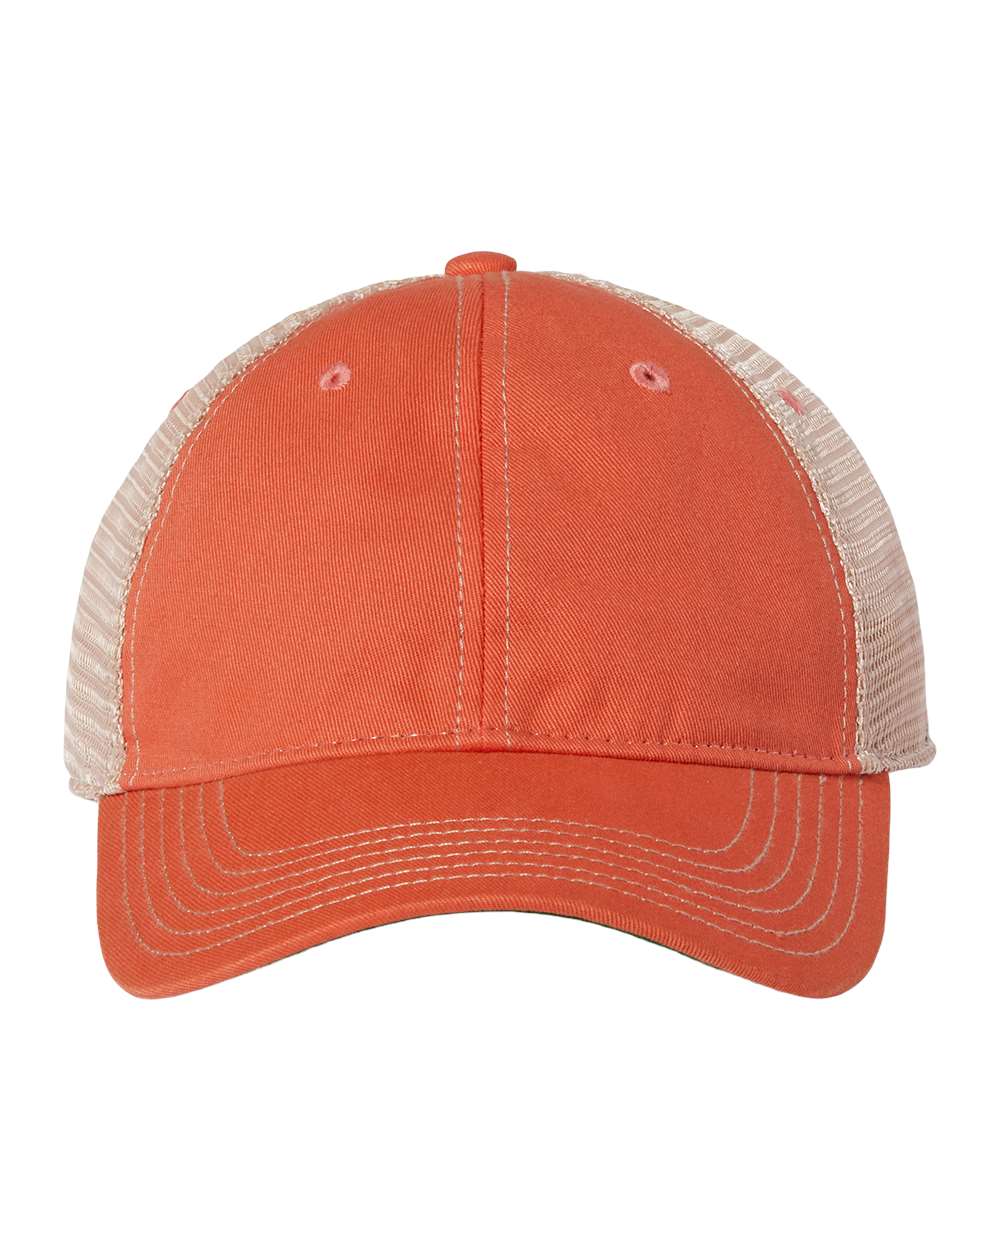 Front view of LEGACY OFA custom hat in coral and khaki